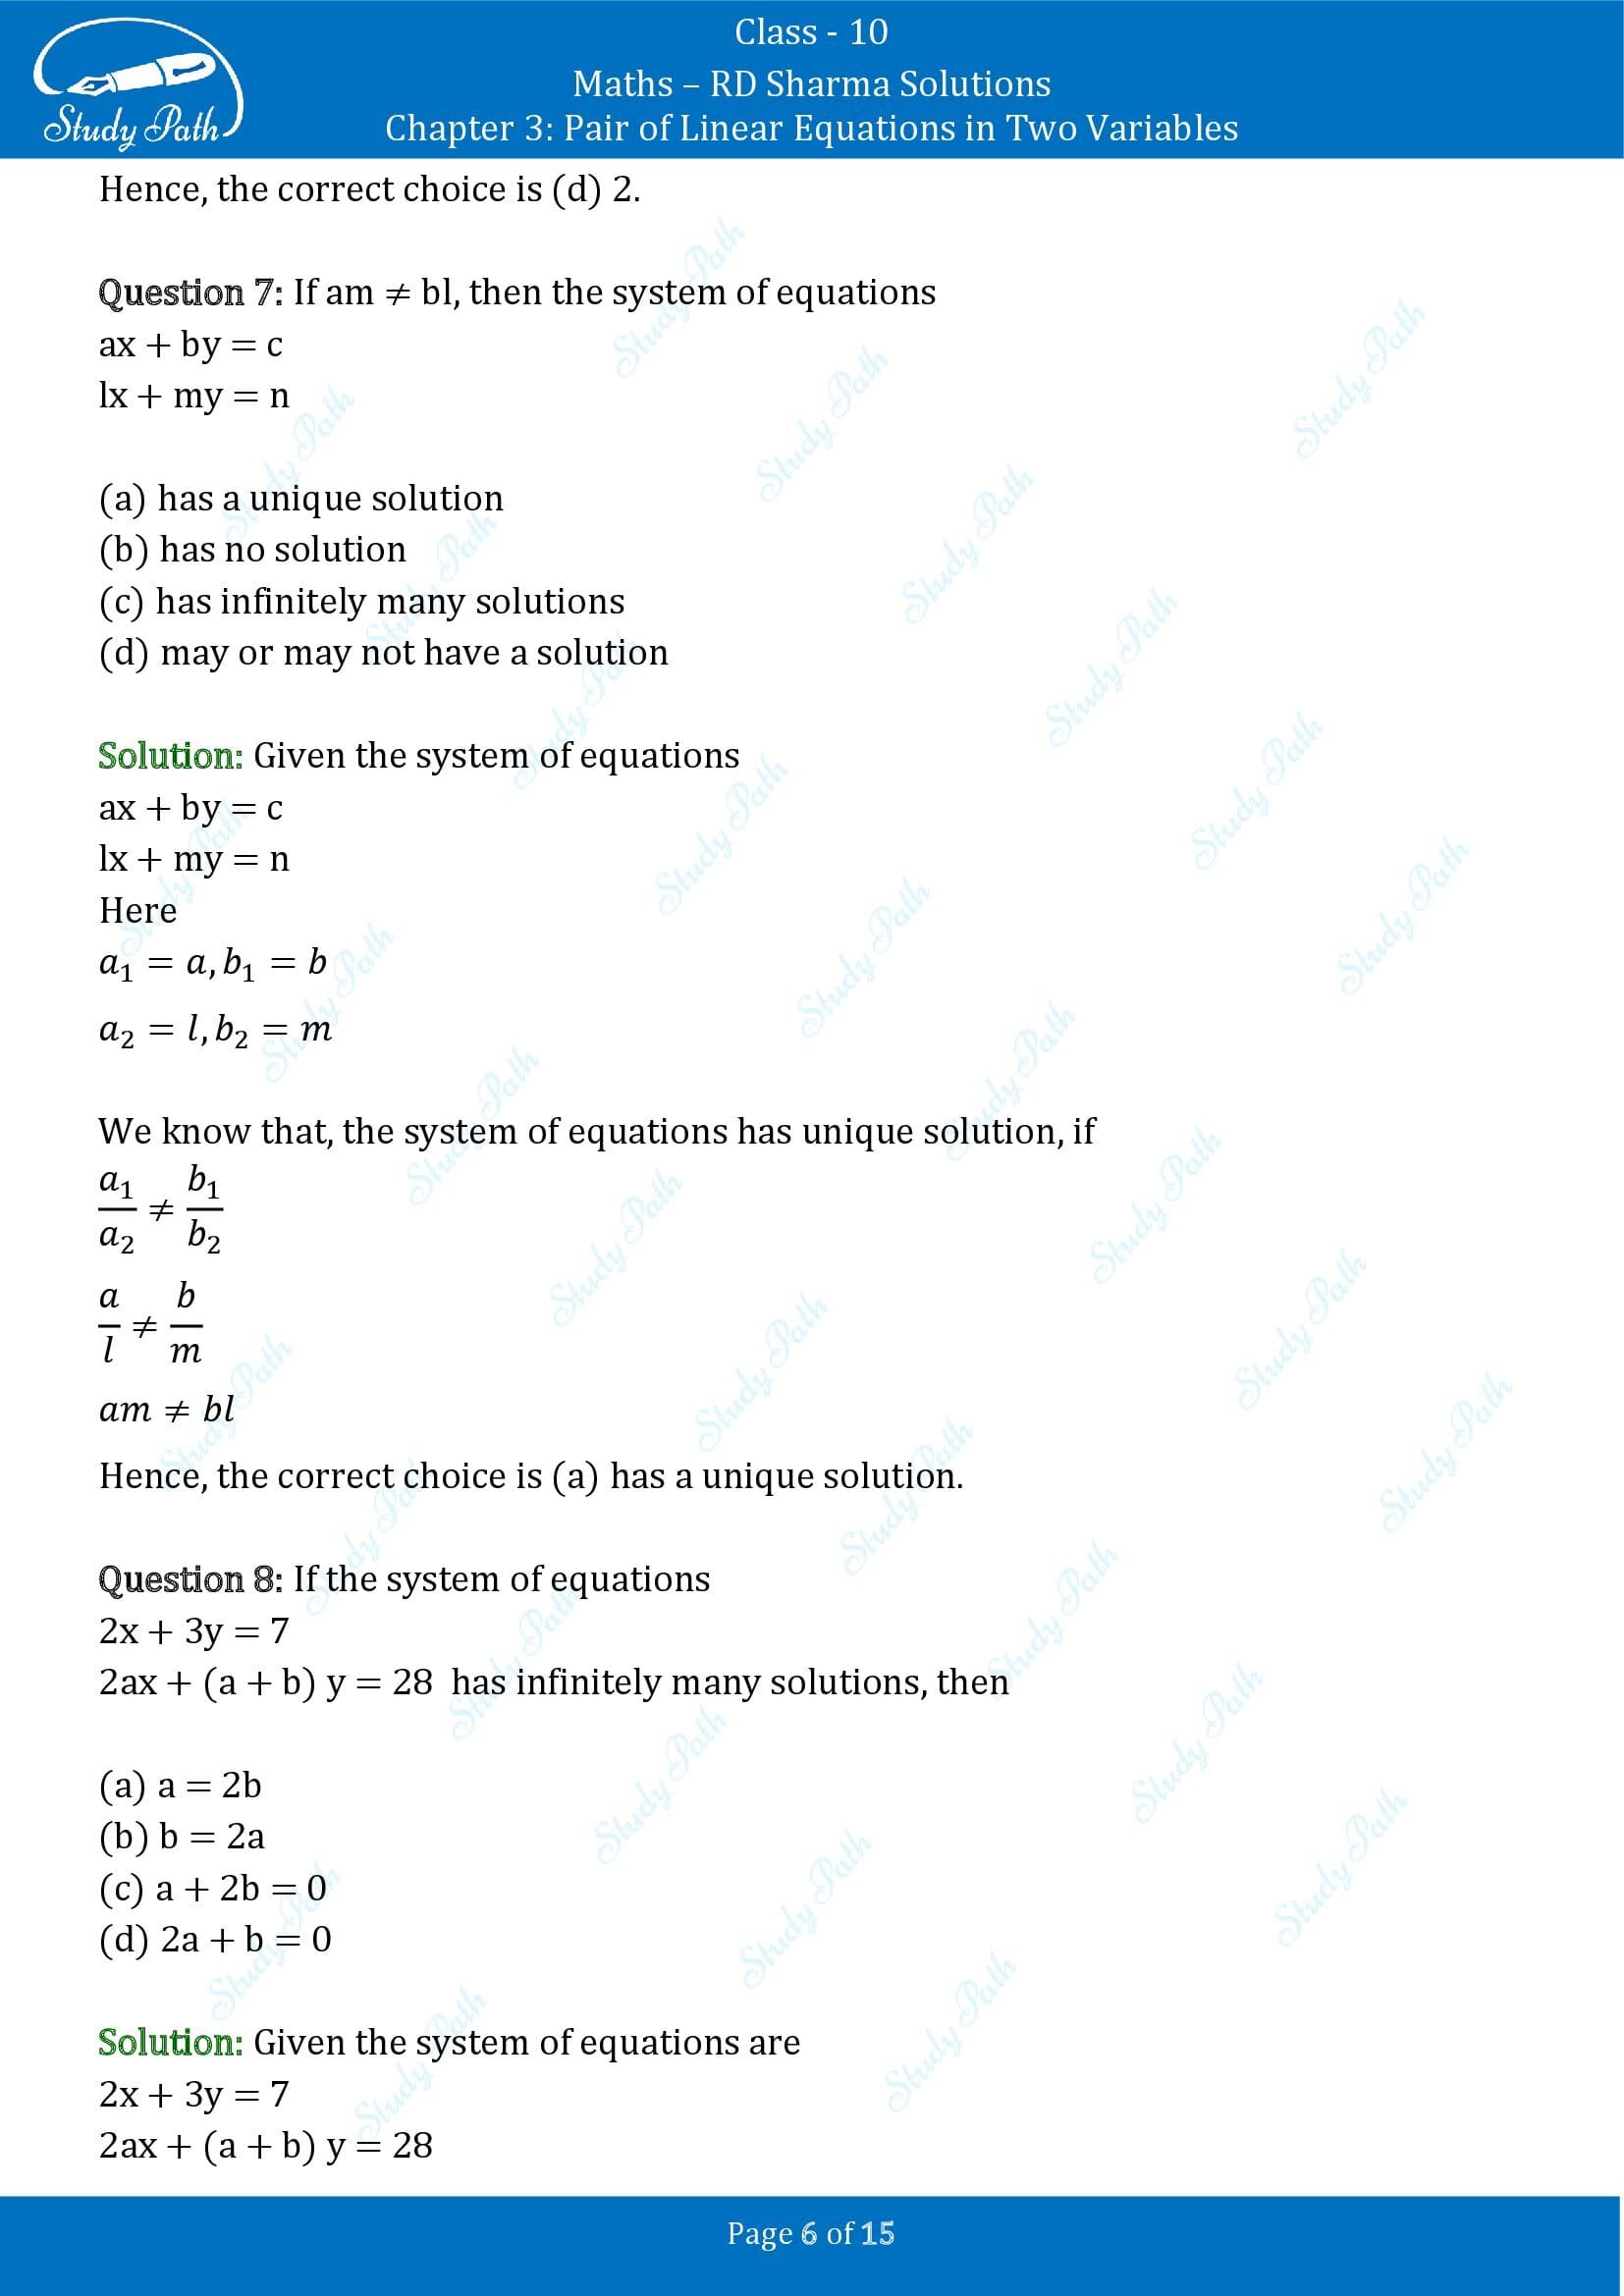 RD Sharma Solutions Class 10 Chapter 3 Pair of Linear Equations in Two Variables Multiple Choice Questions MCQs 00006